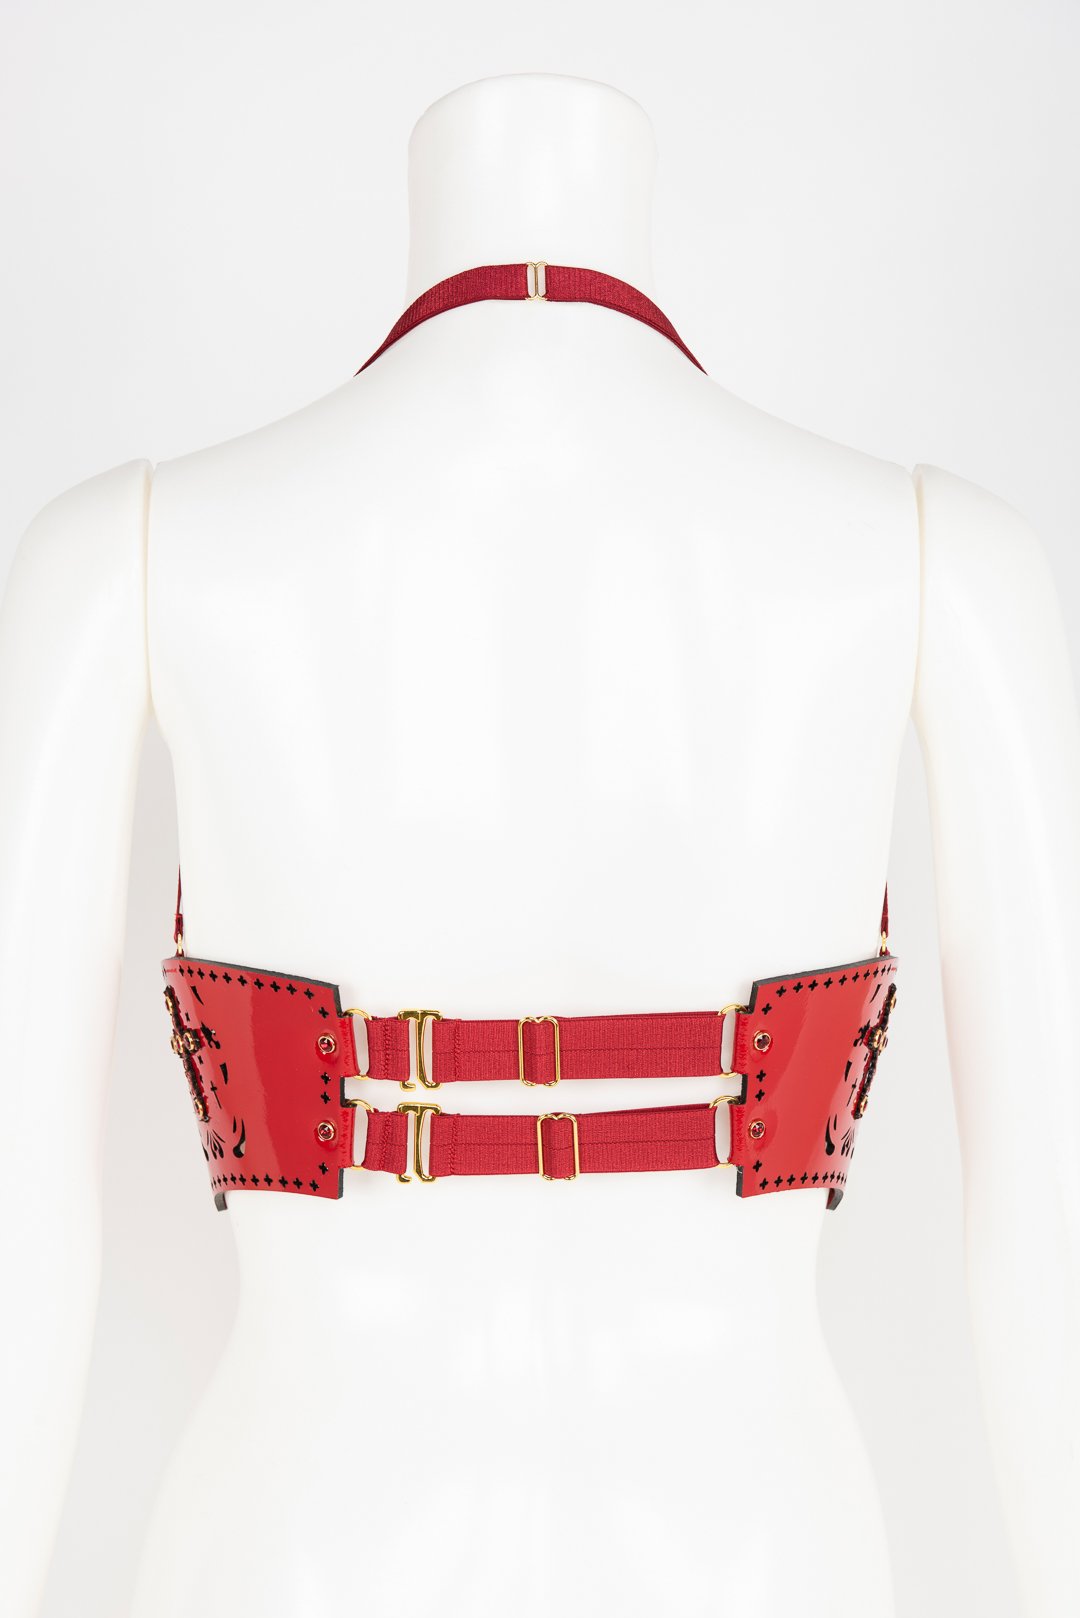 Luxury Patent Leather Harness with Crystal Rivets Buy Online at Fraulein Kink